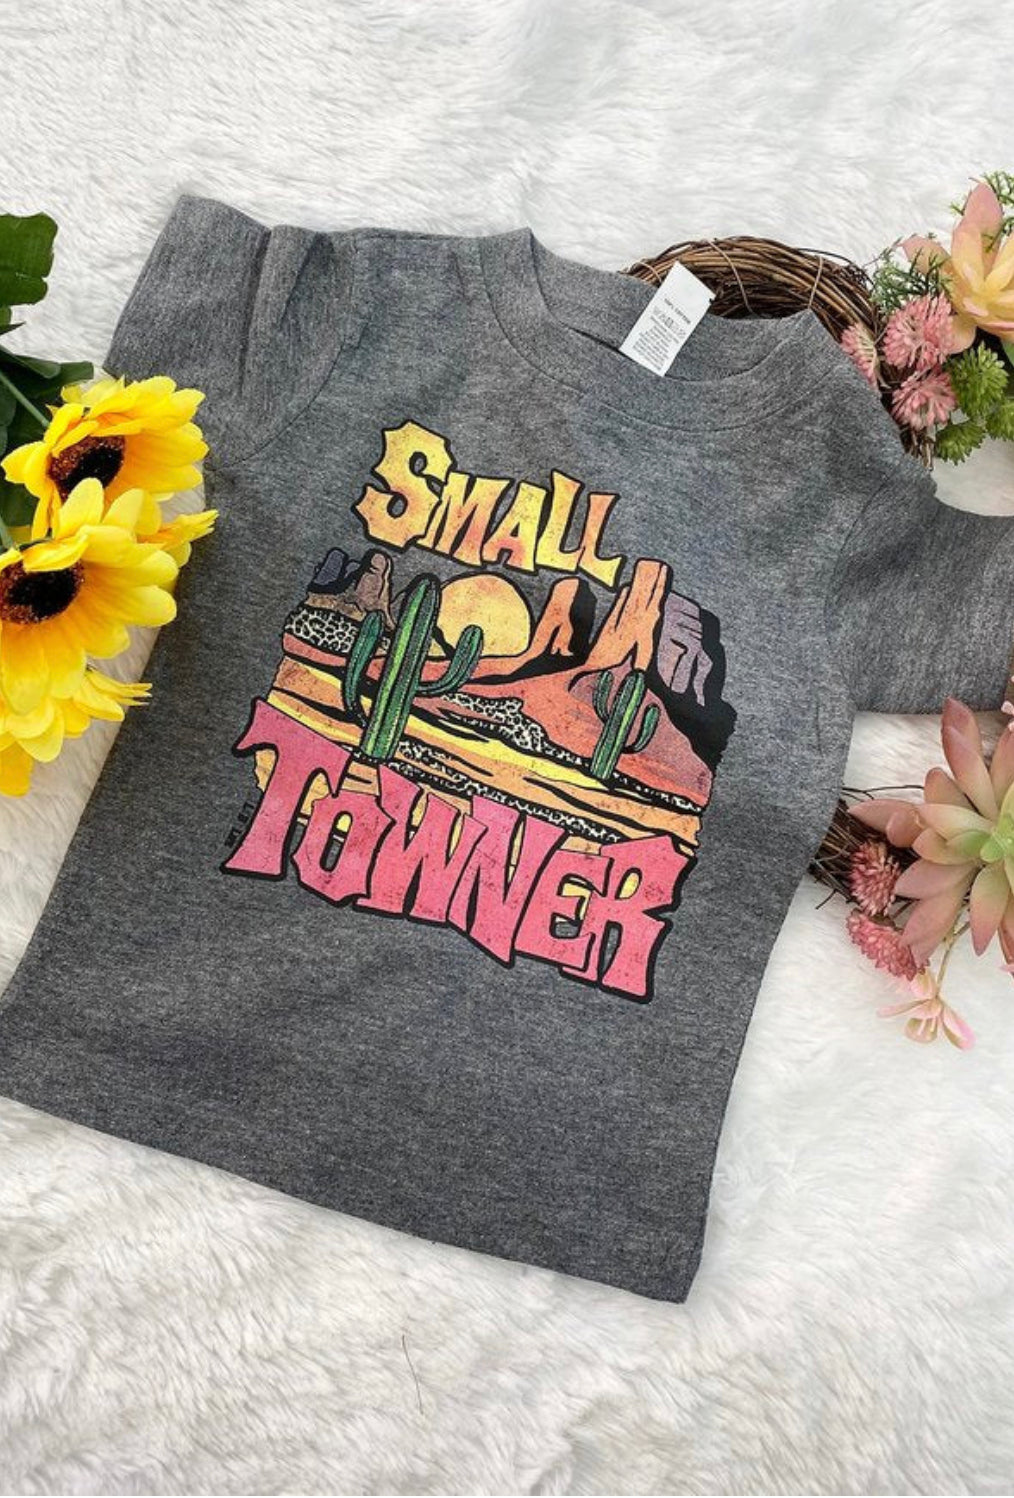 Small Towner Kids Tee